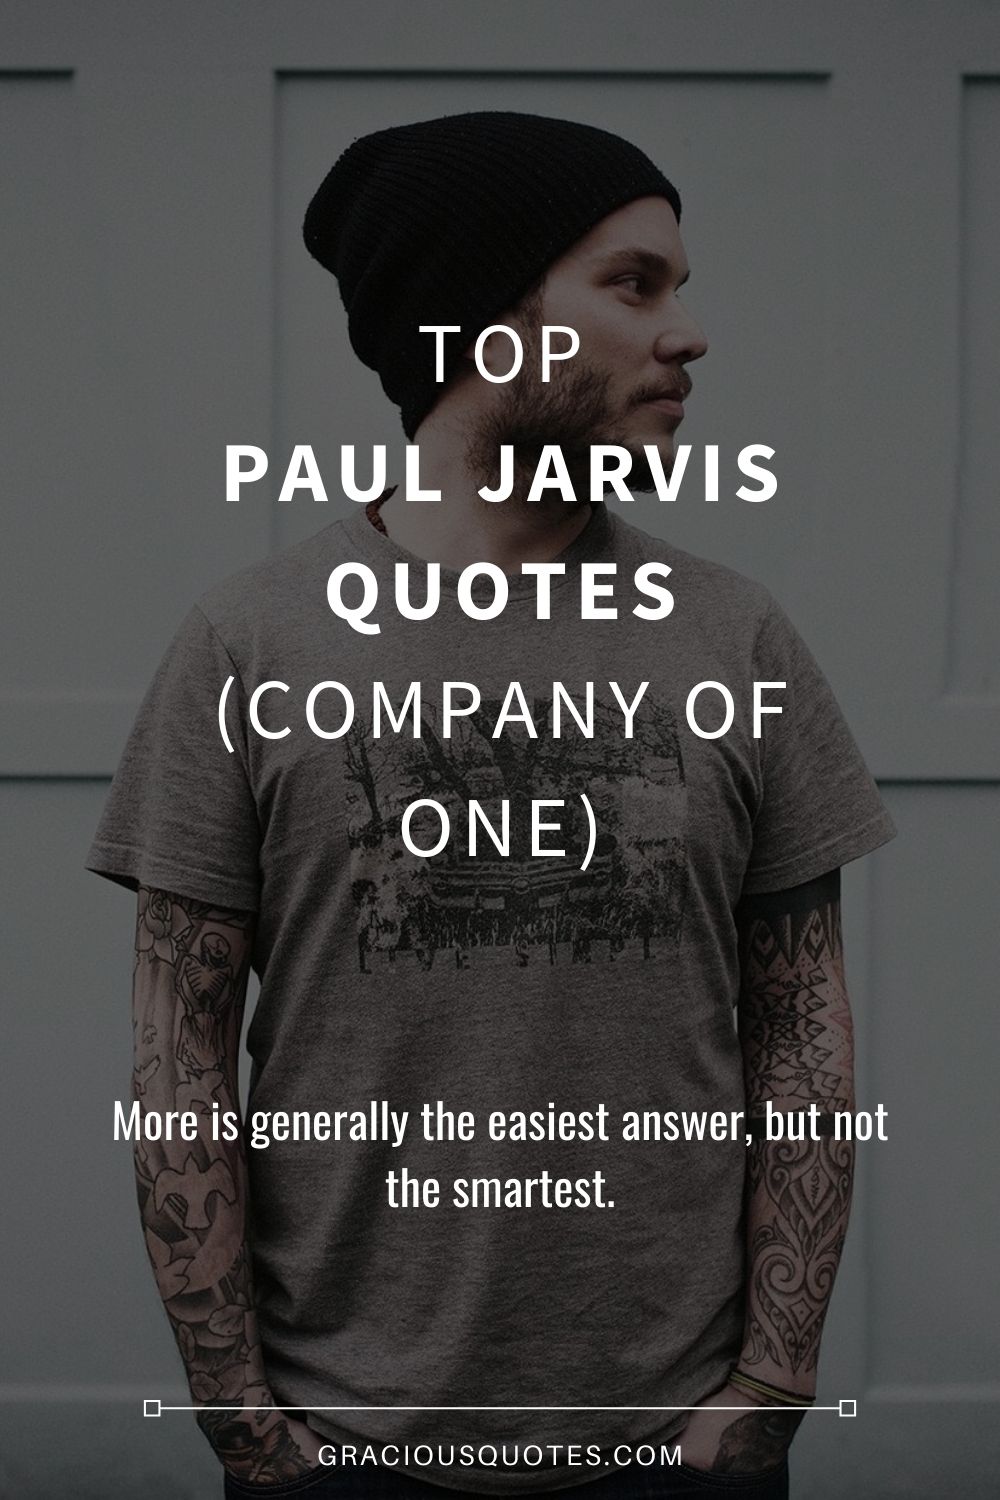 Top Paul Jarvis Quotes (COMPANY OF ONE) - Gracious Quotes